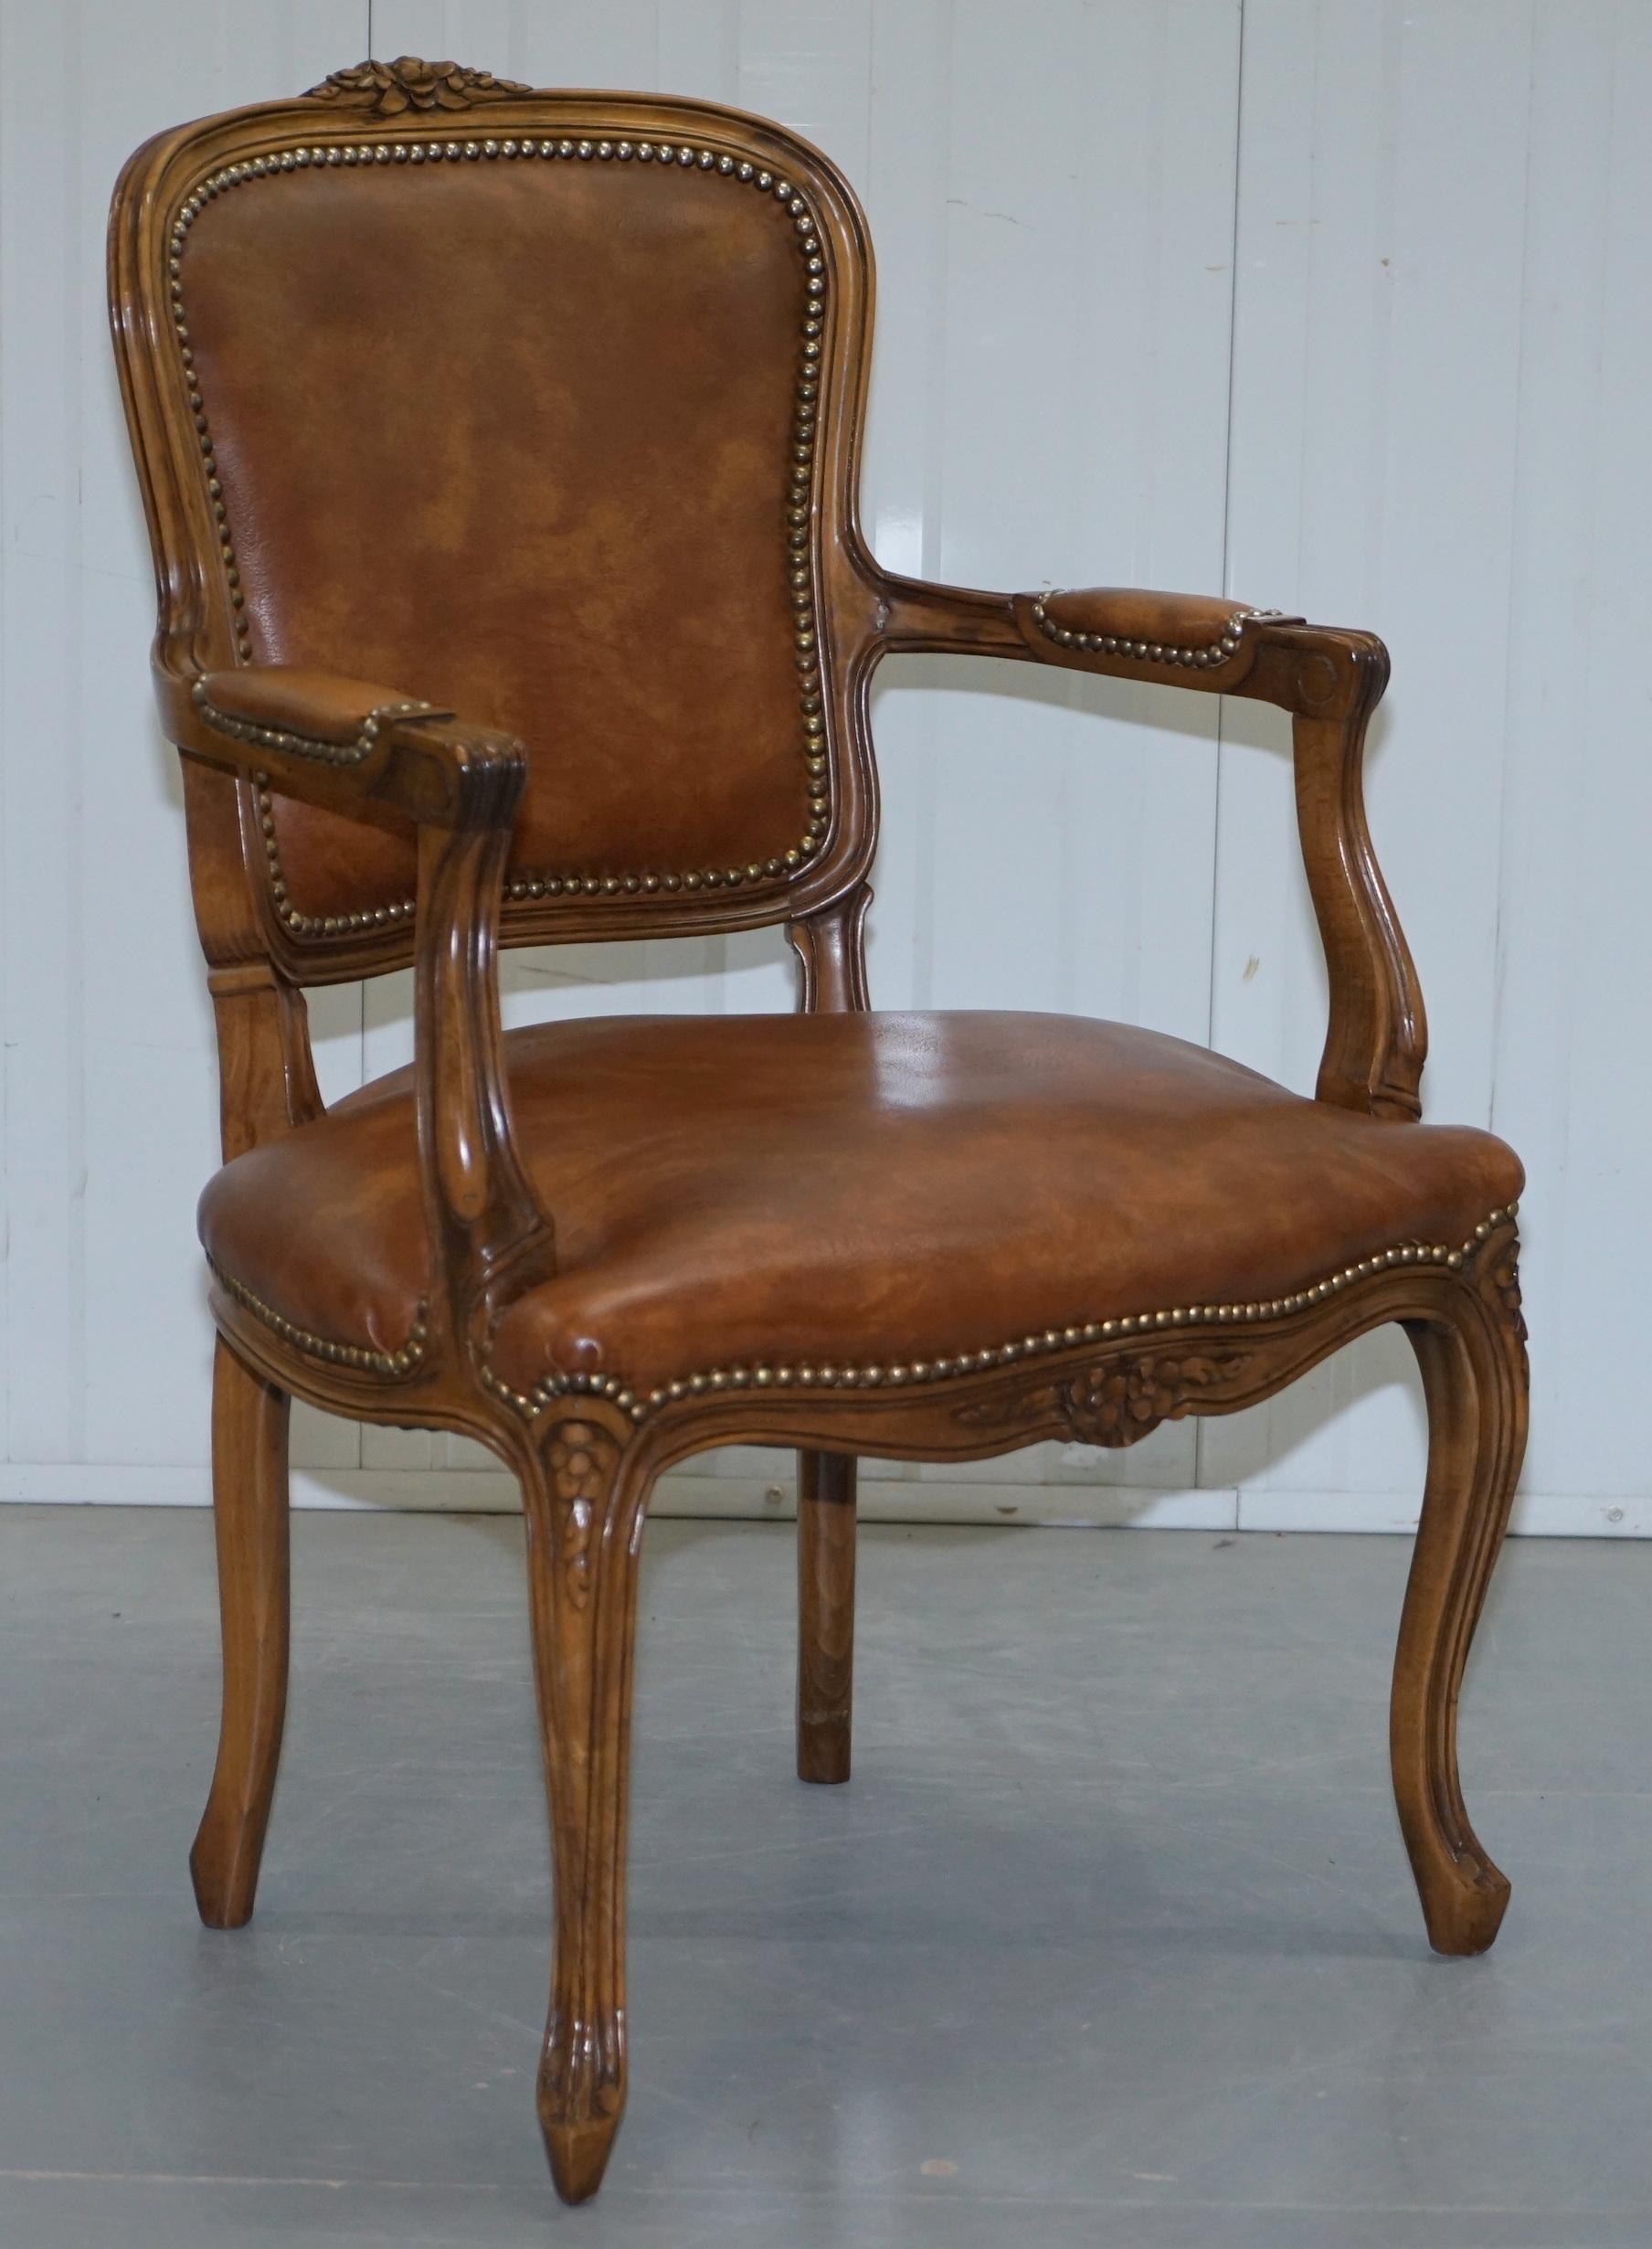 We are delighted to offer for sale this stunning pair of vintage French Louis XVII Fratelli armchairs 

A good looking and well-made pair, very decorative and traditional by design

We have deep cleaned hand condition waxed and hand polished